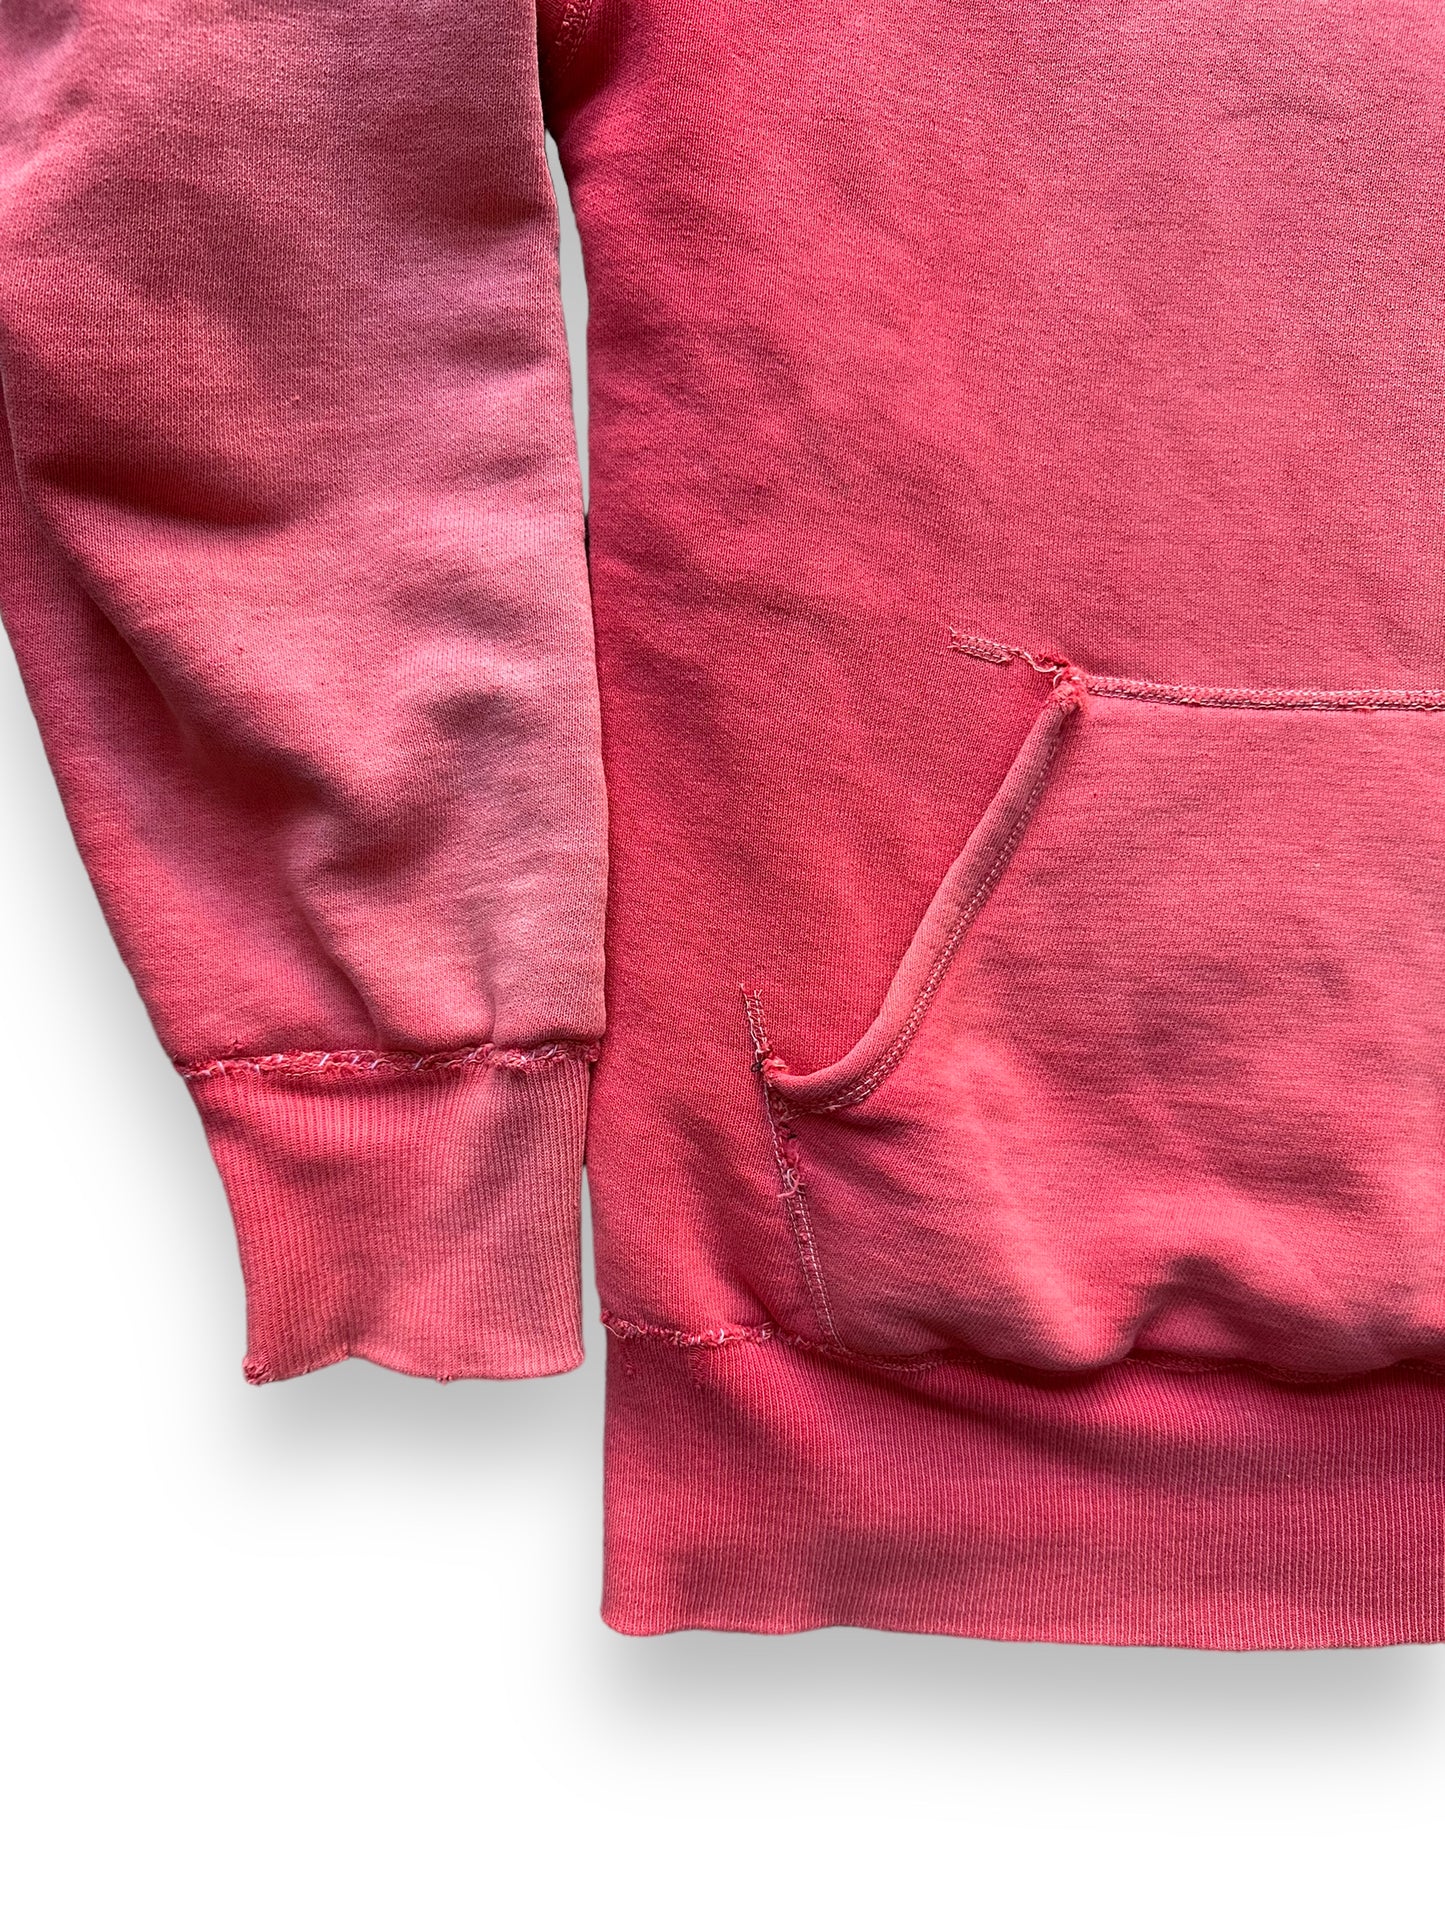 Front Right Cuffs and Fading on Vintage Red De Jac Waffle Lined Hooded Sweatshirt SZ L | Vintage Waffle Sweatshirt Seattle | Barn Owl Vintage Clothing